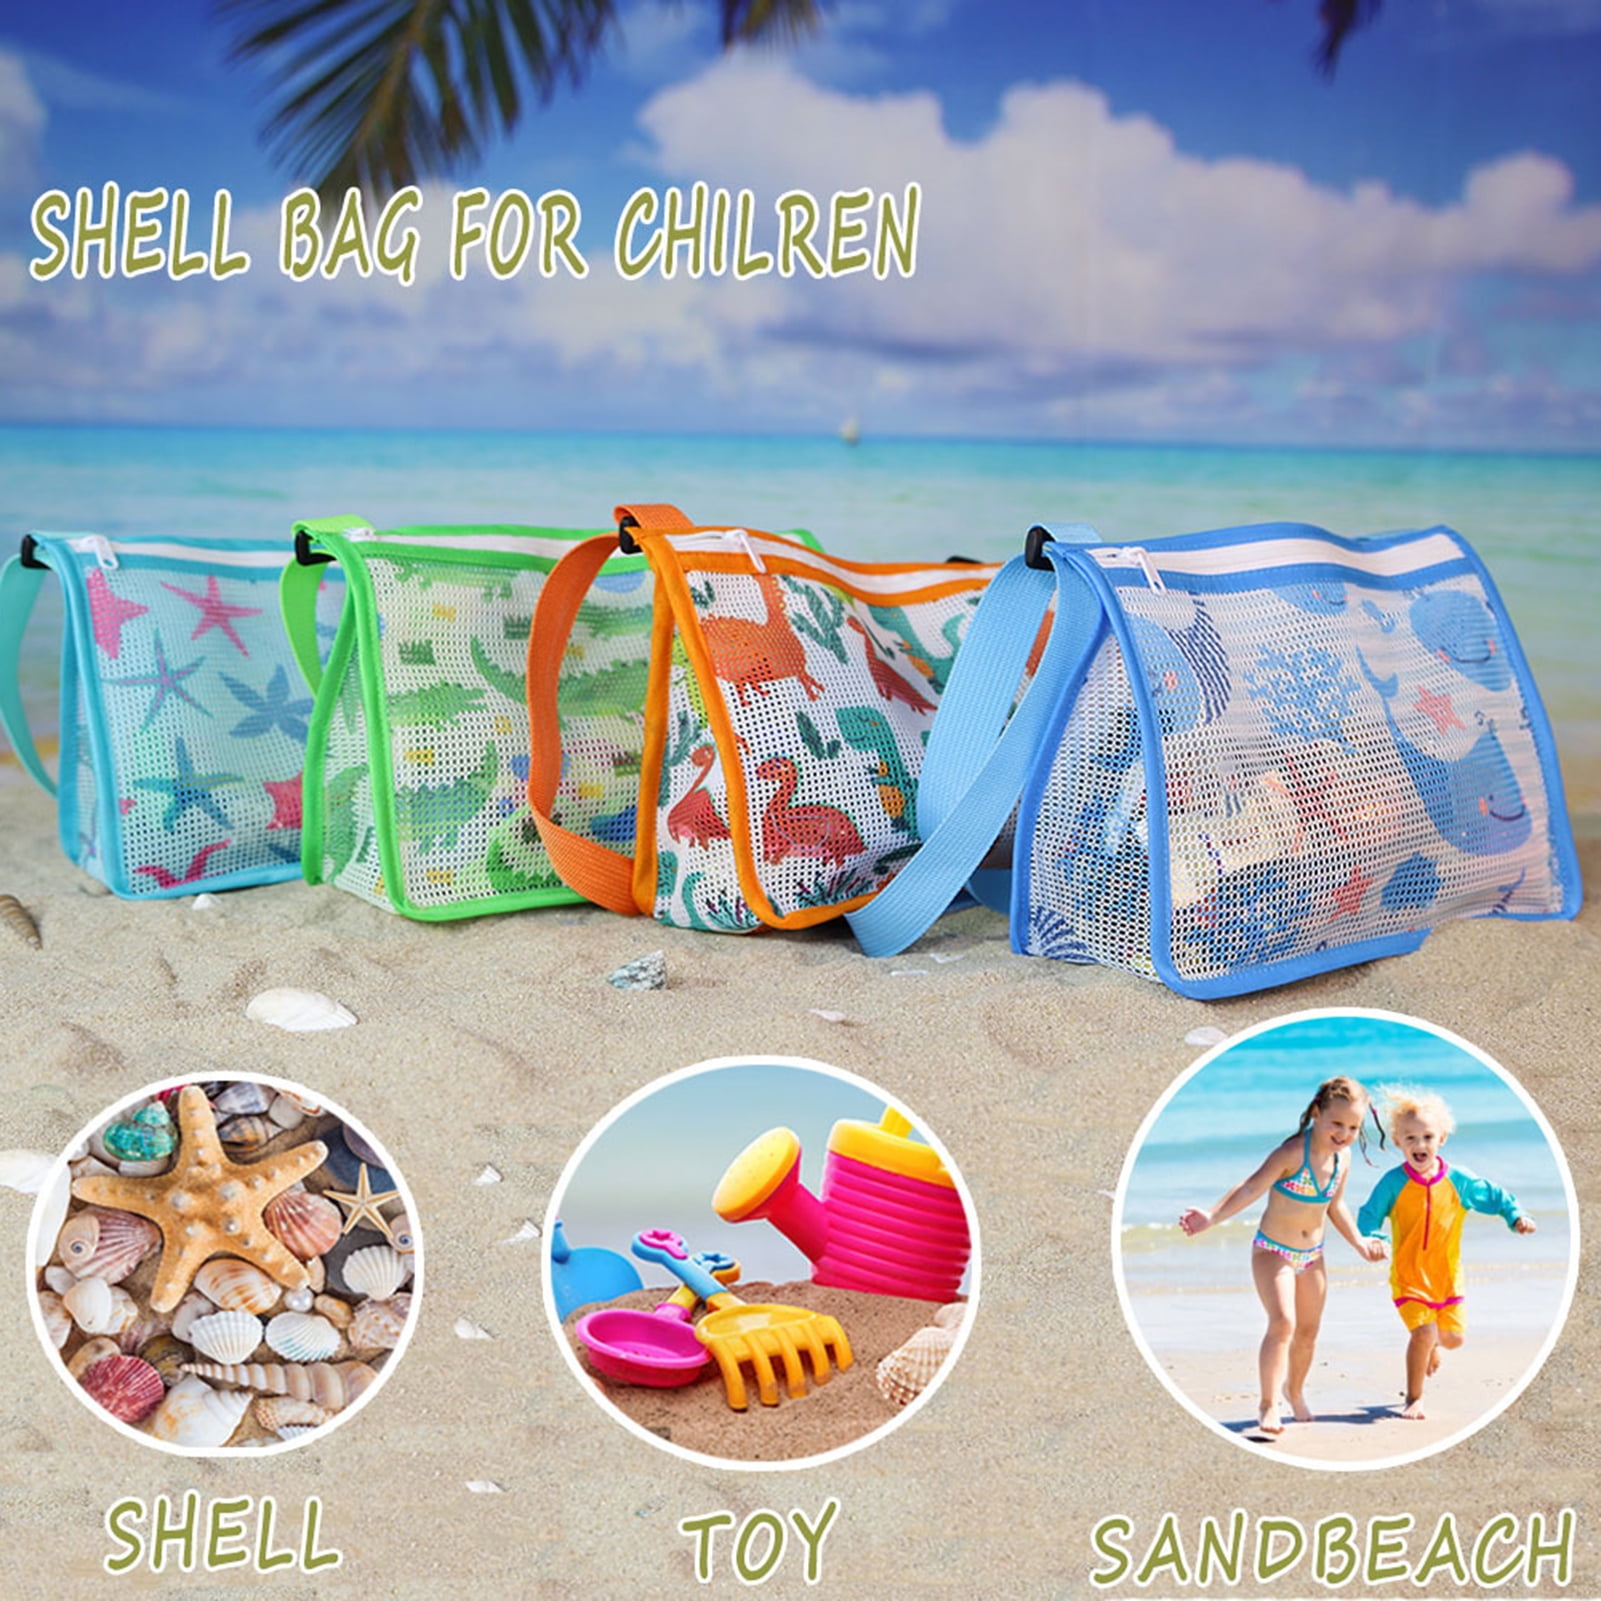 Large Mesh Beach Bag for Toys Sand Away Tote for Child Swim Pool Travel  Sandy Shoes Wet Towels 18 x 12 x 18 Inches - Blue green 